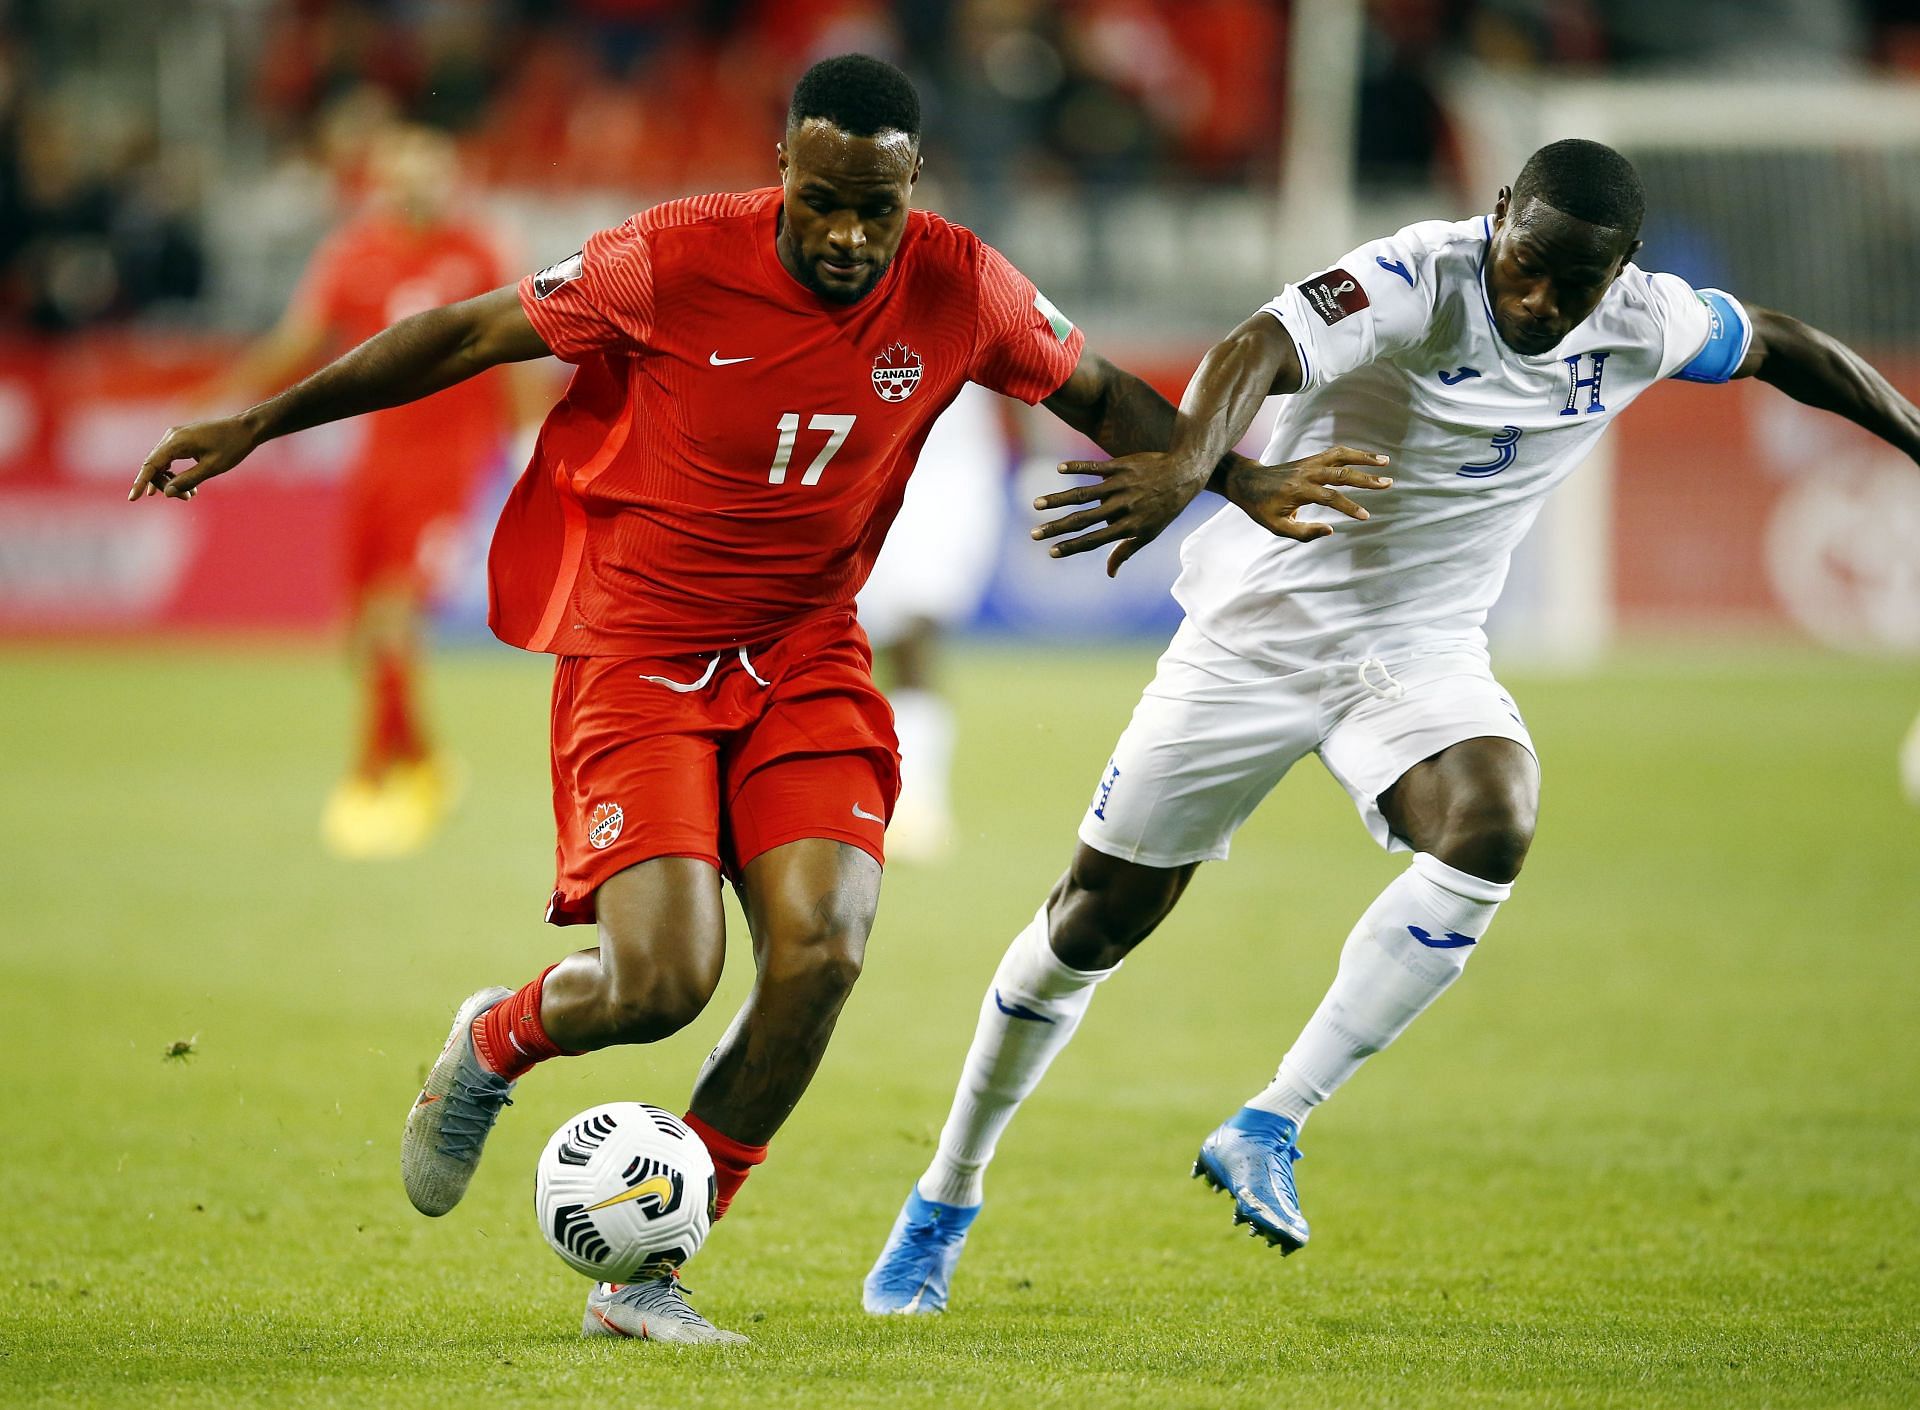 Canada are unbeaten in their 2022 FIFA World Cup qualifying campaign so far